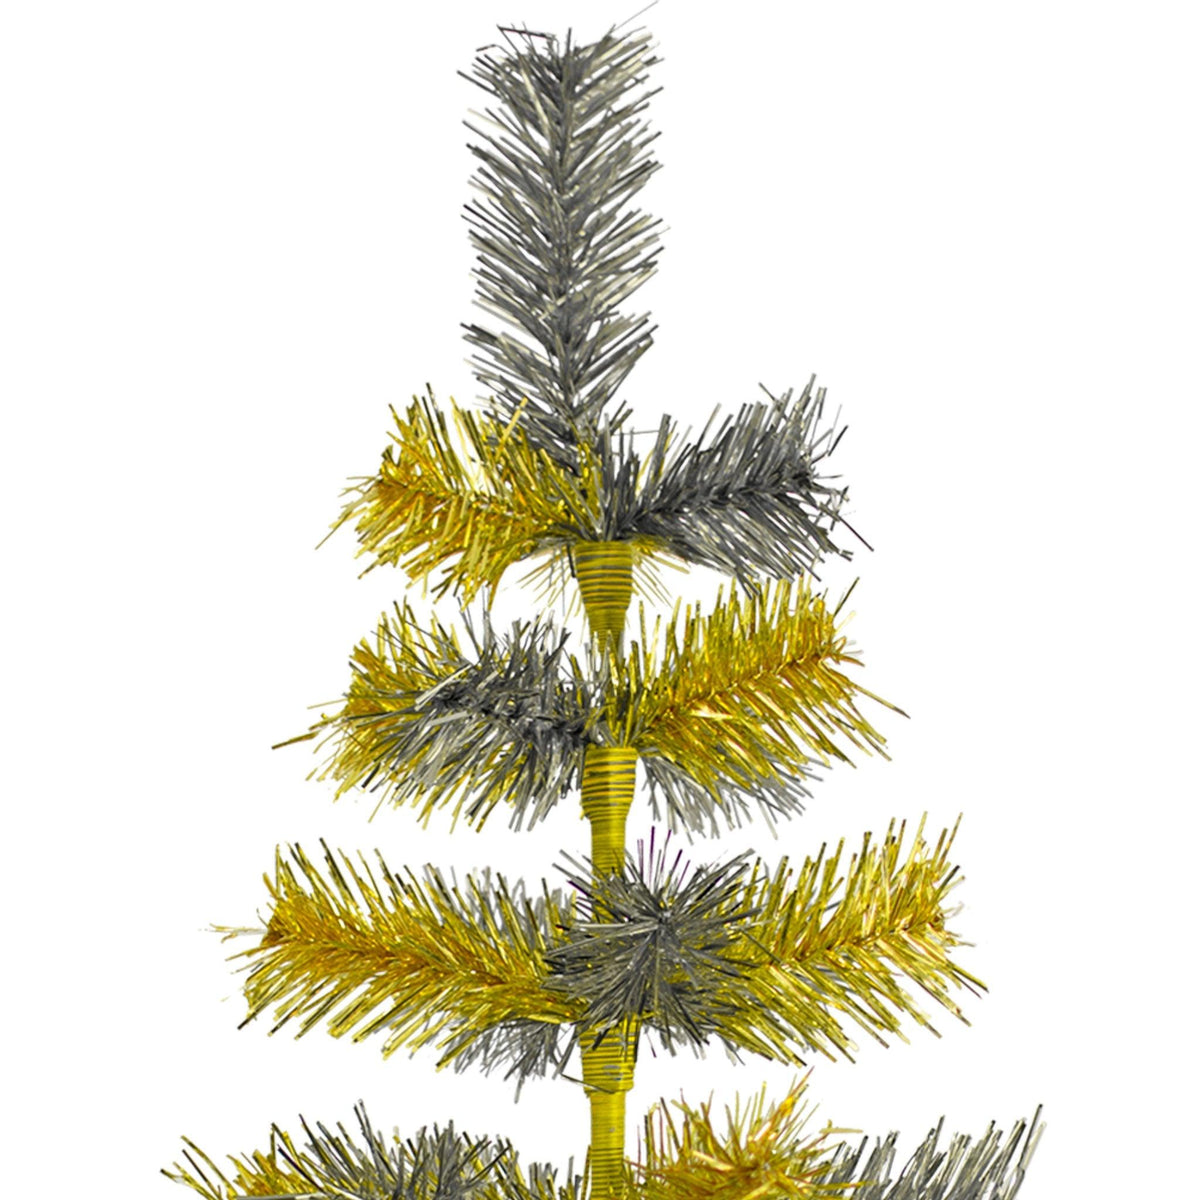 24in tall gold and silver American-Made christmas trees come in unique colors for the holidays